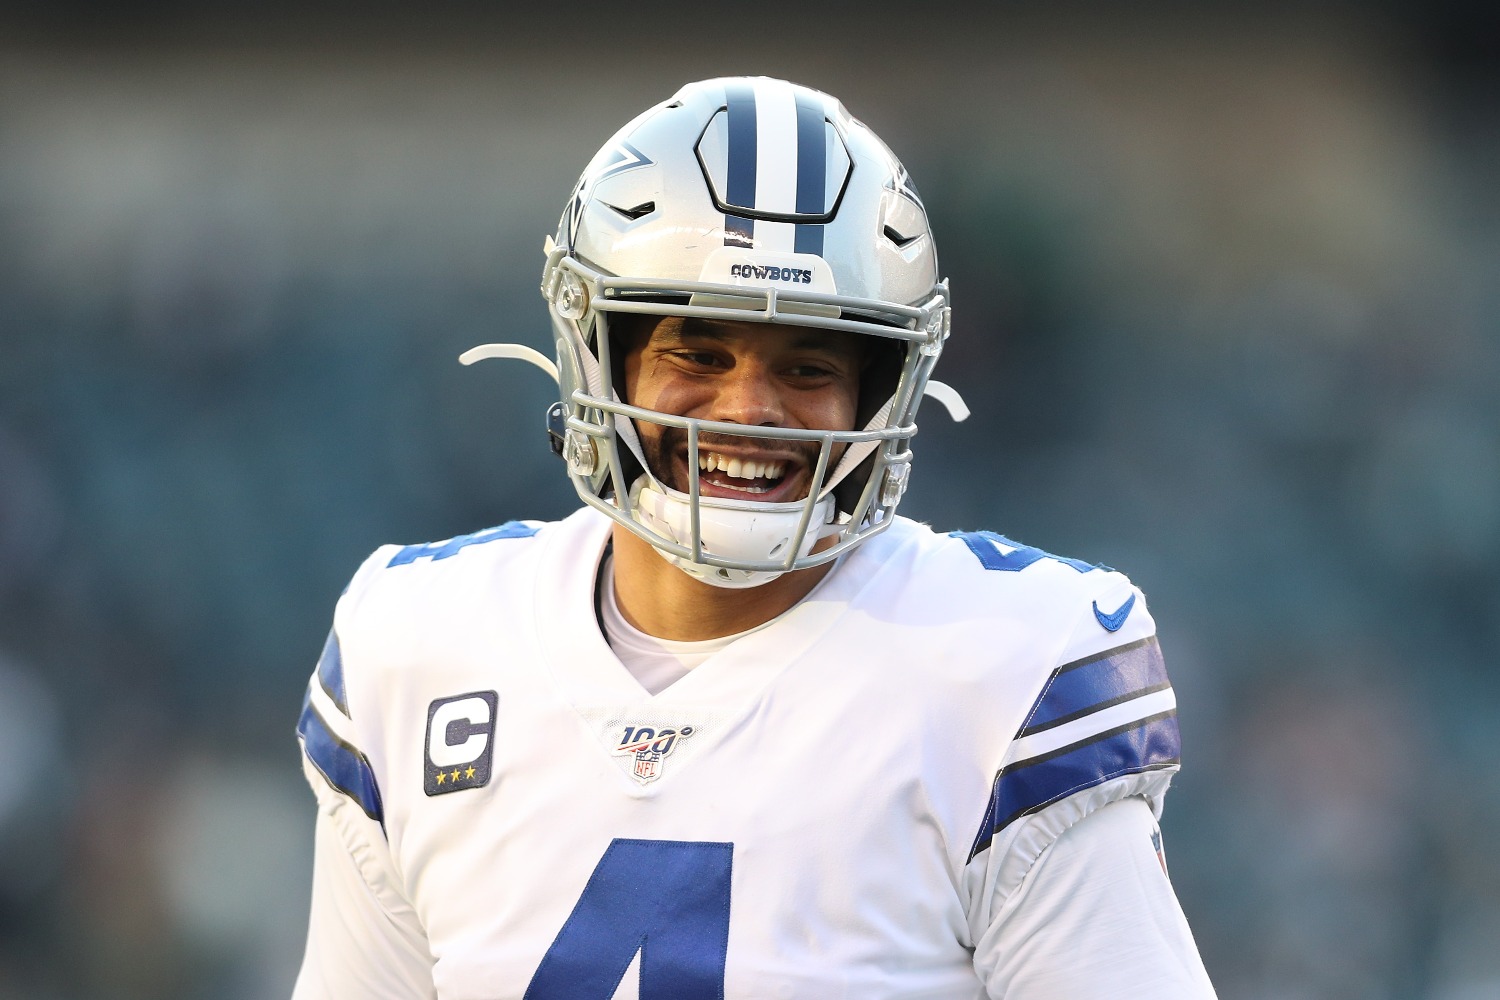 Dak Prescott sent a scary message about Aldon Smith, who should be the Cowboys' biggest x-factor this season.